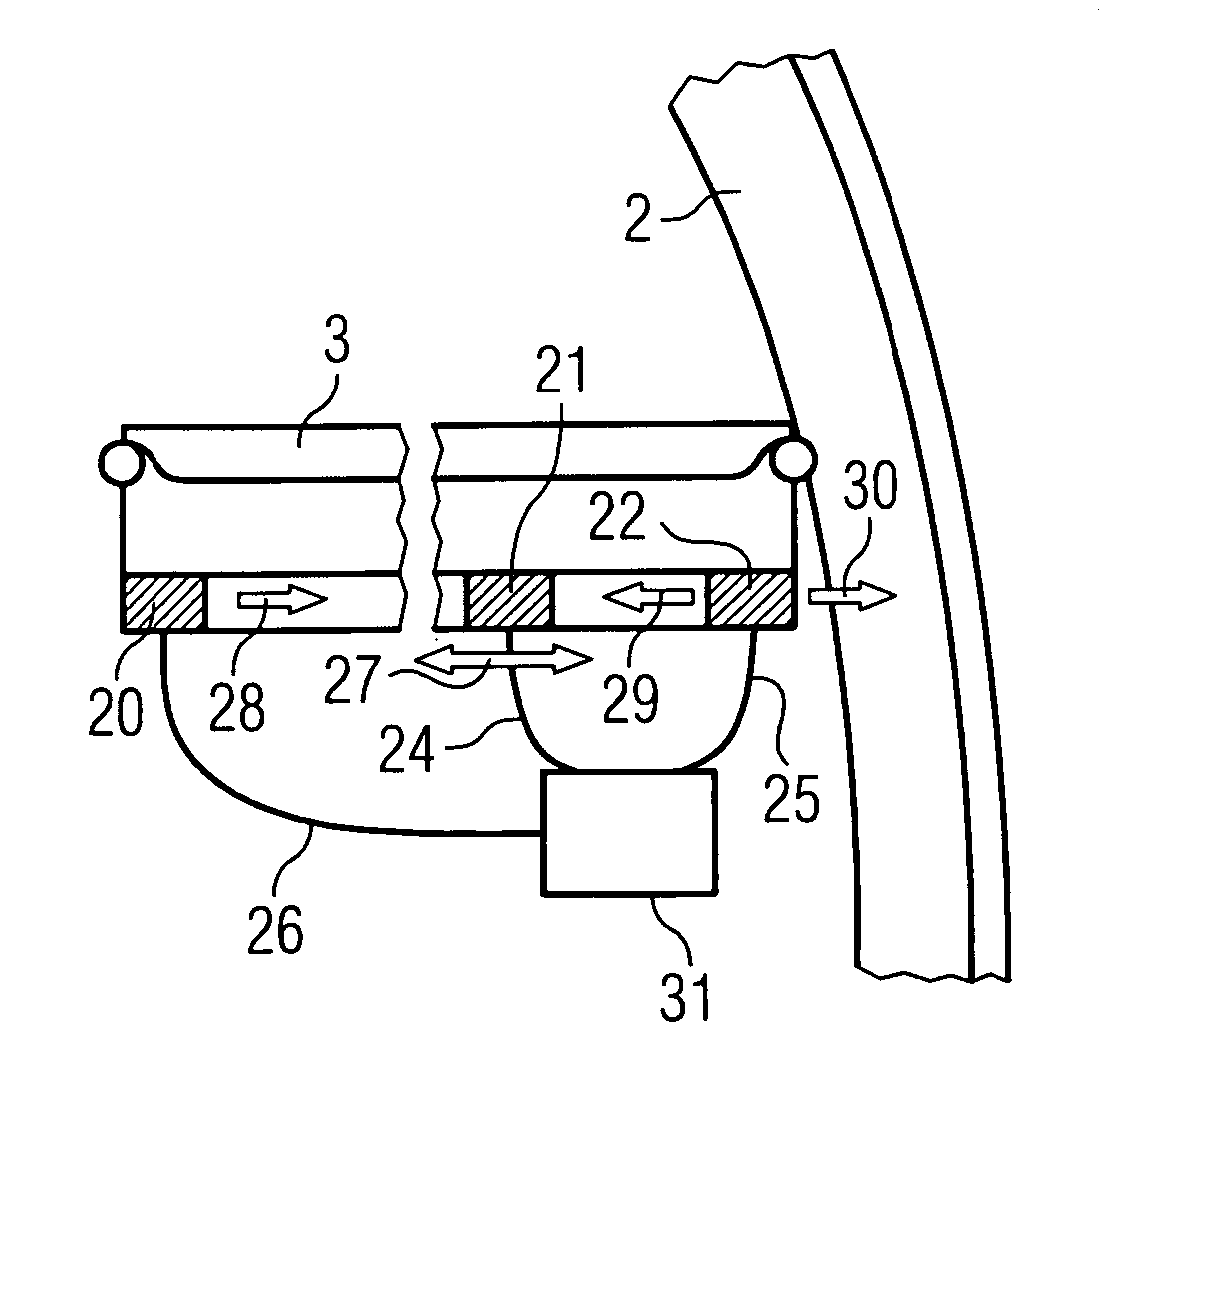 Structure element for an aircraft